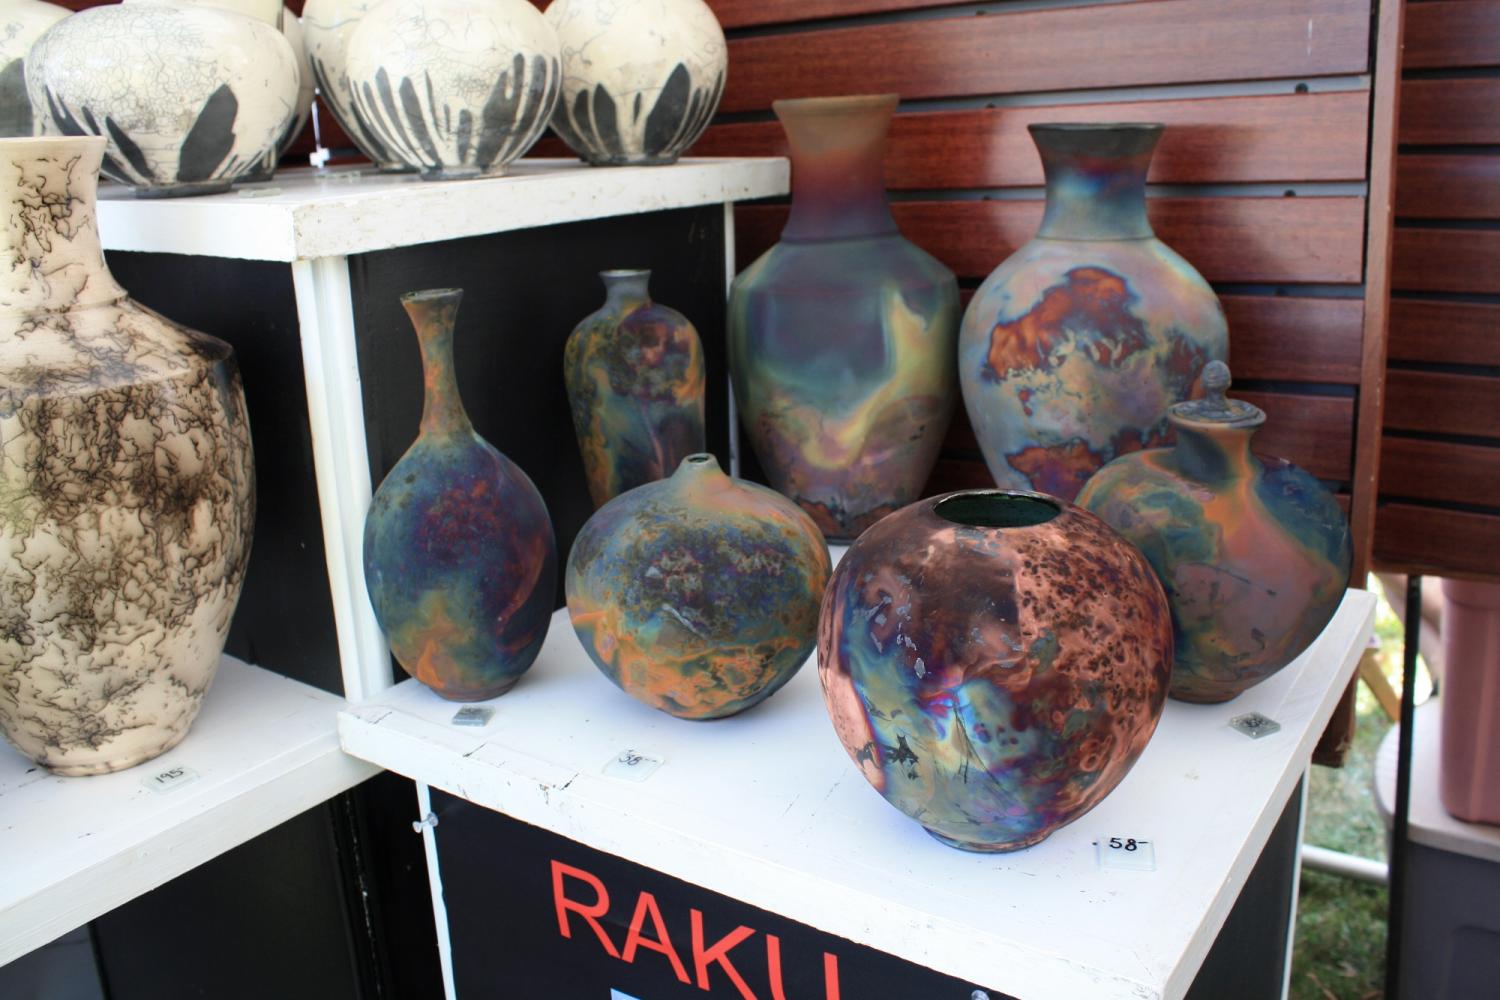 Raku pottery by Philpot, KY artist Thomas Porter. Thomas work is influenced by his early trips to Japan, China and Korea, where he first learned about Raku, a technique where clay is glazed, fired in a kiln at a lower temperature than usual and then cooled very quickly in either combustible materials or water leaving the pieces with rich velvet shades and the signature crackle. Porter said this technique was currently his favorite as well as his most popularly bought pieces.